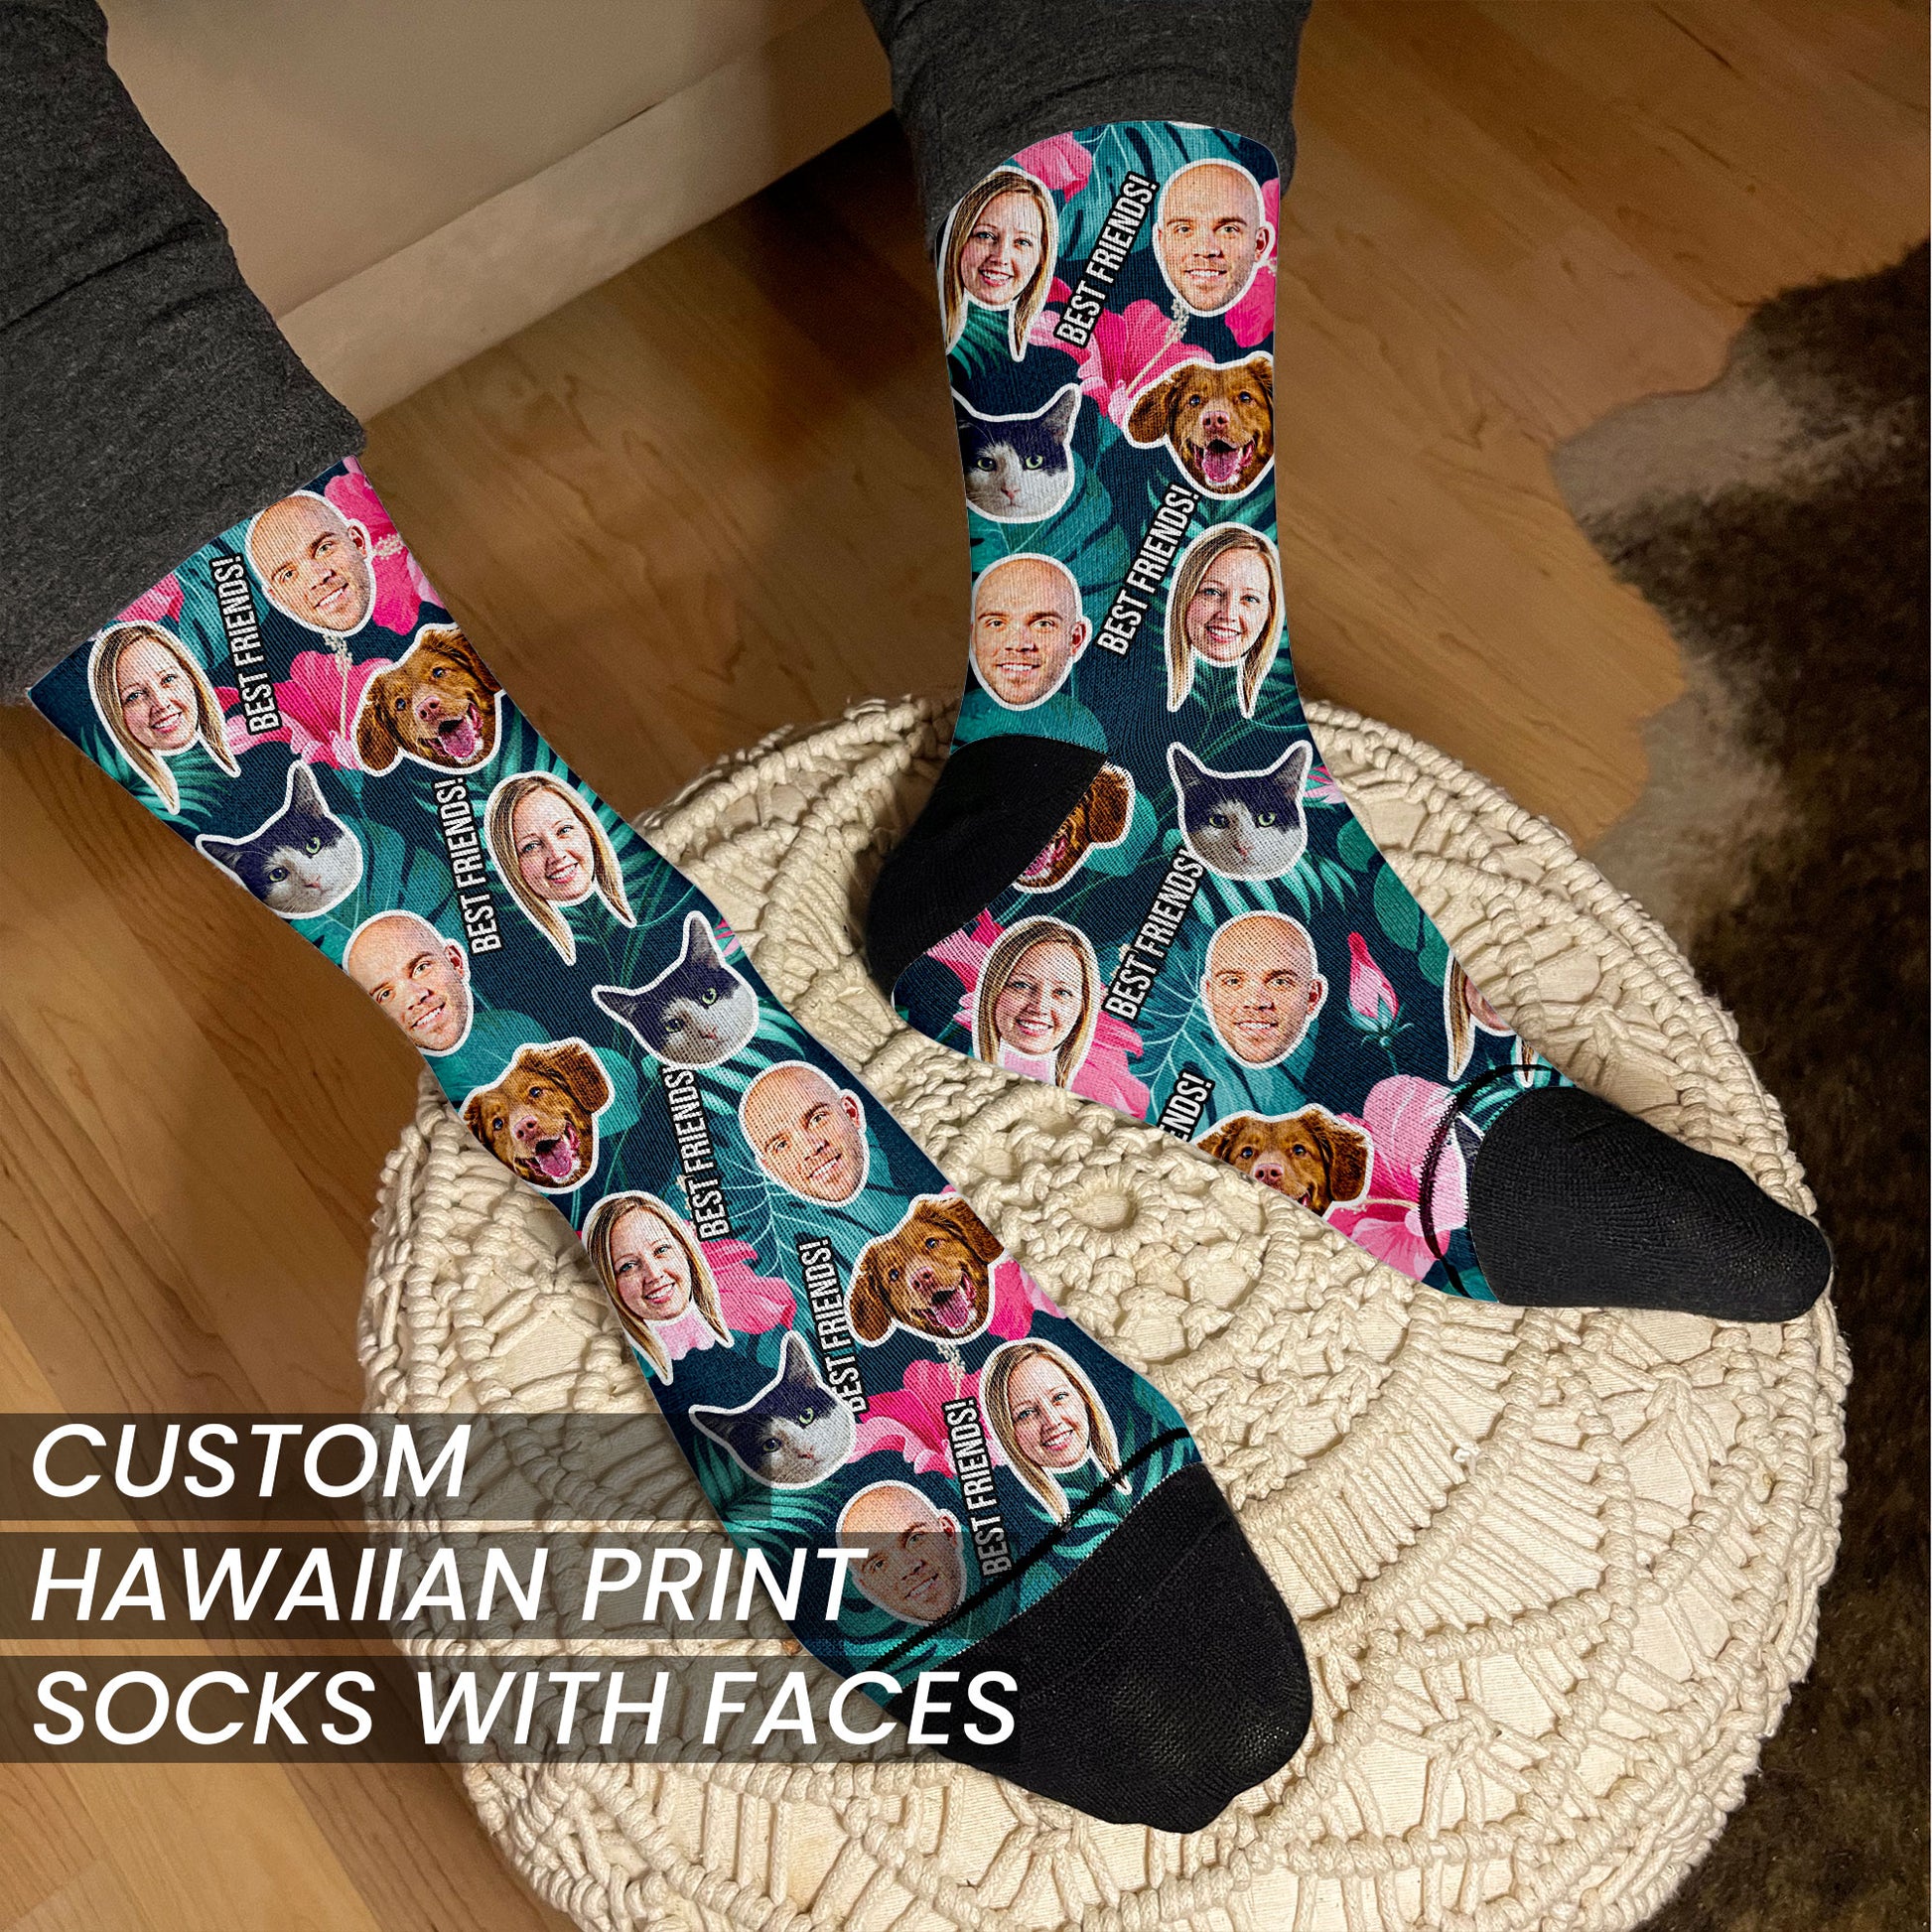 personalized hawaiian shirt style socks with your design on man's feet